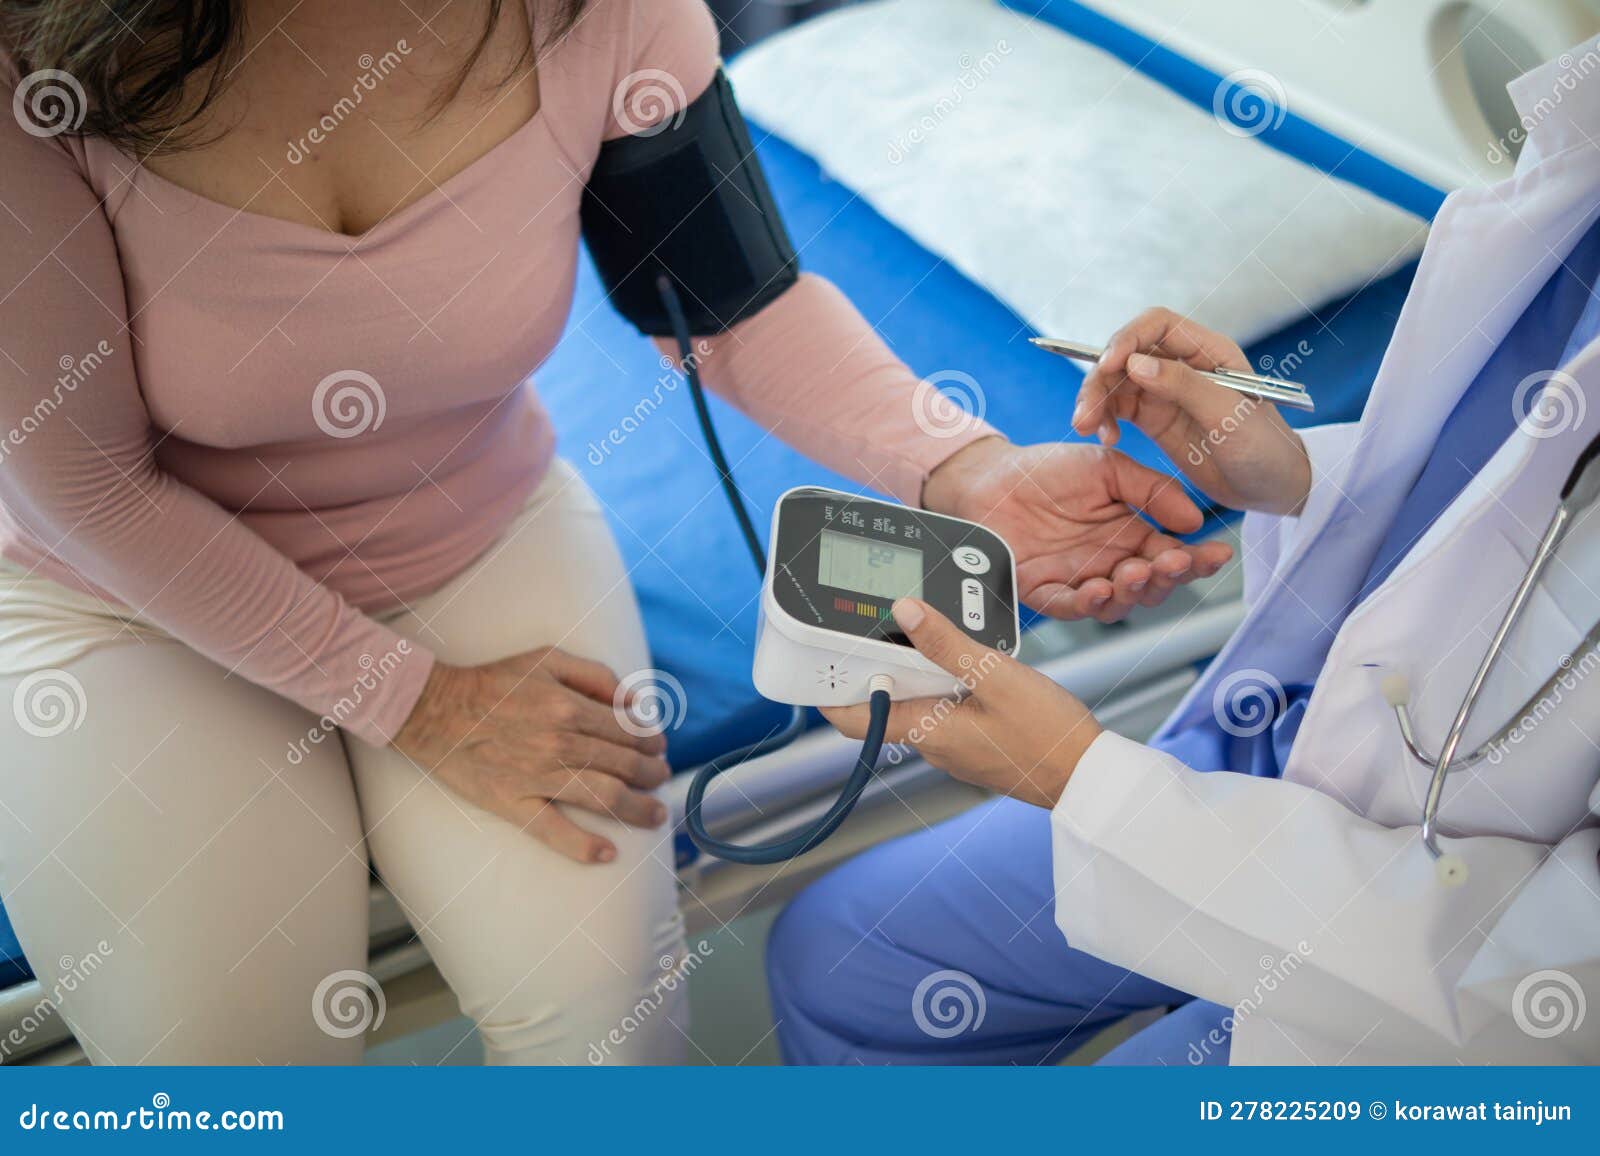 The Doctor Is Using A Blood Pressure Monitor On An Elderly Patient To